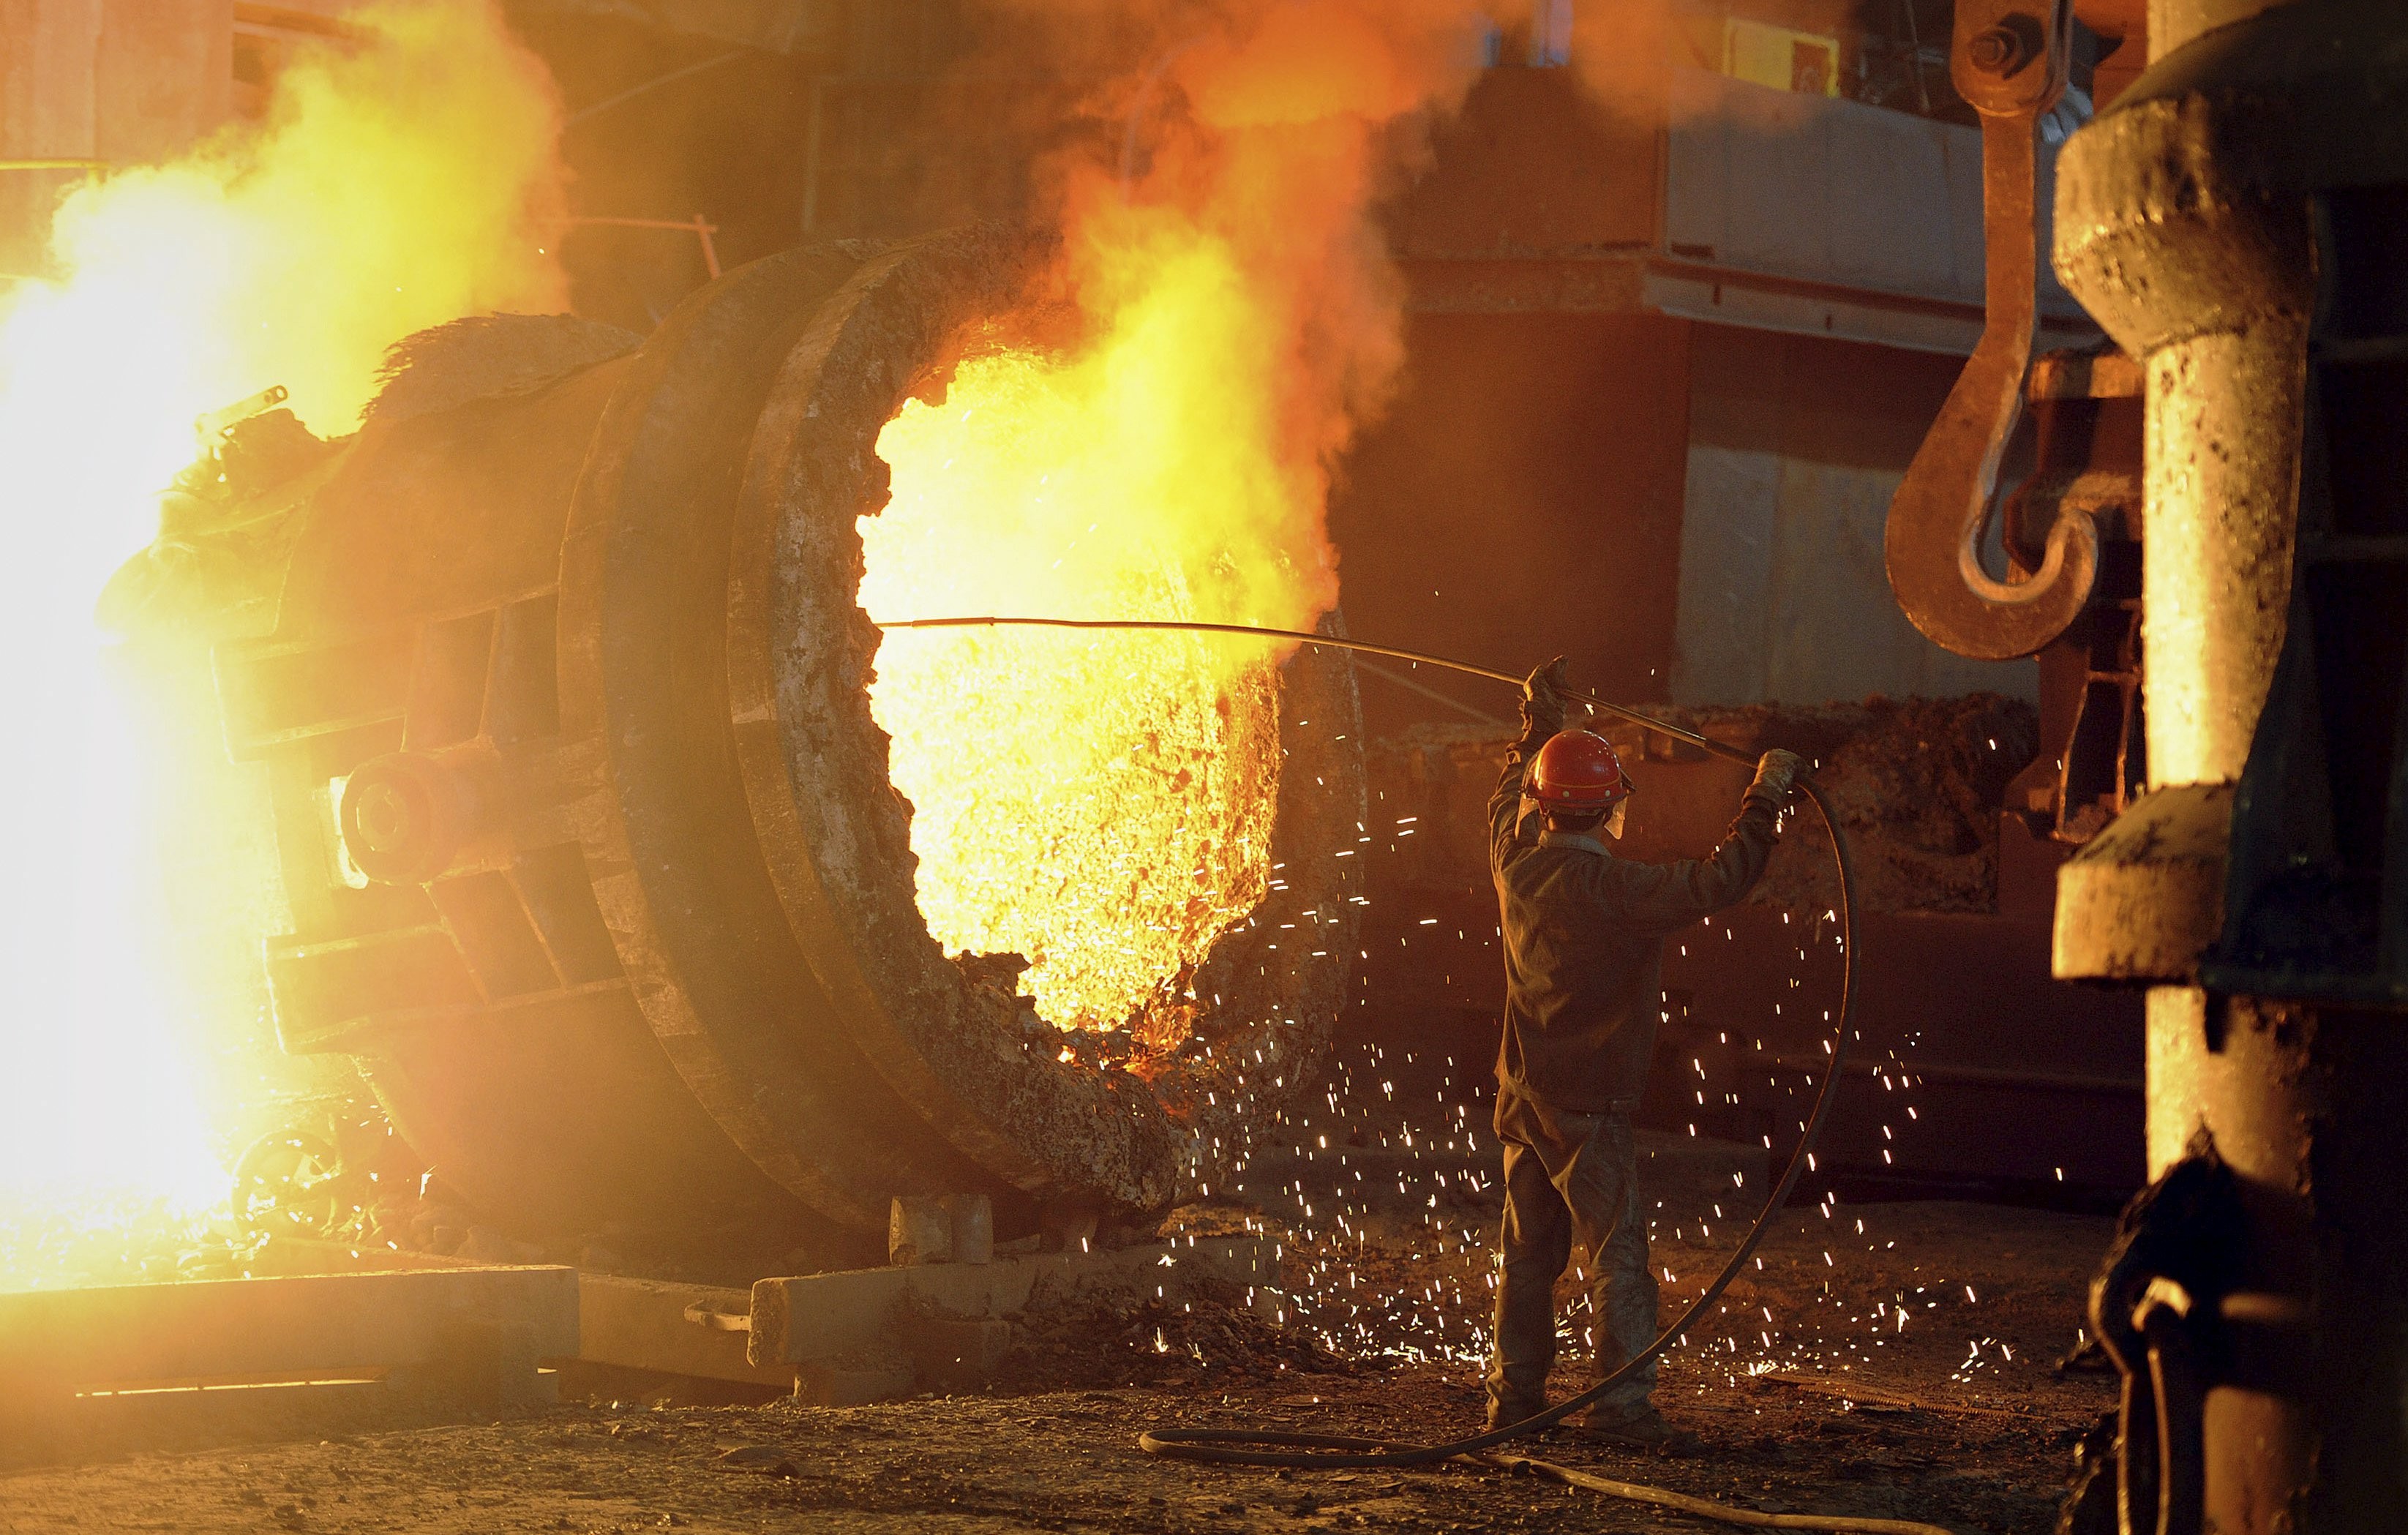 A steel worker operates a furnace at a steel manufacturing plant in Hefei. Photo: Reuters